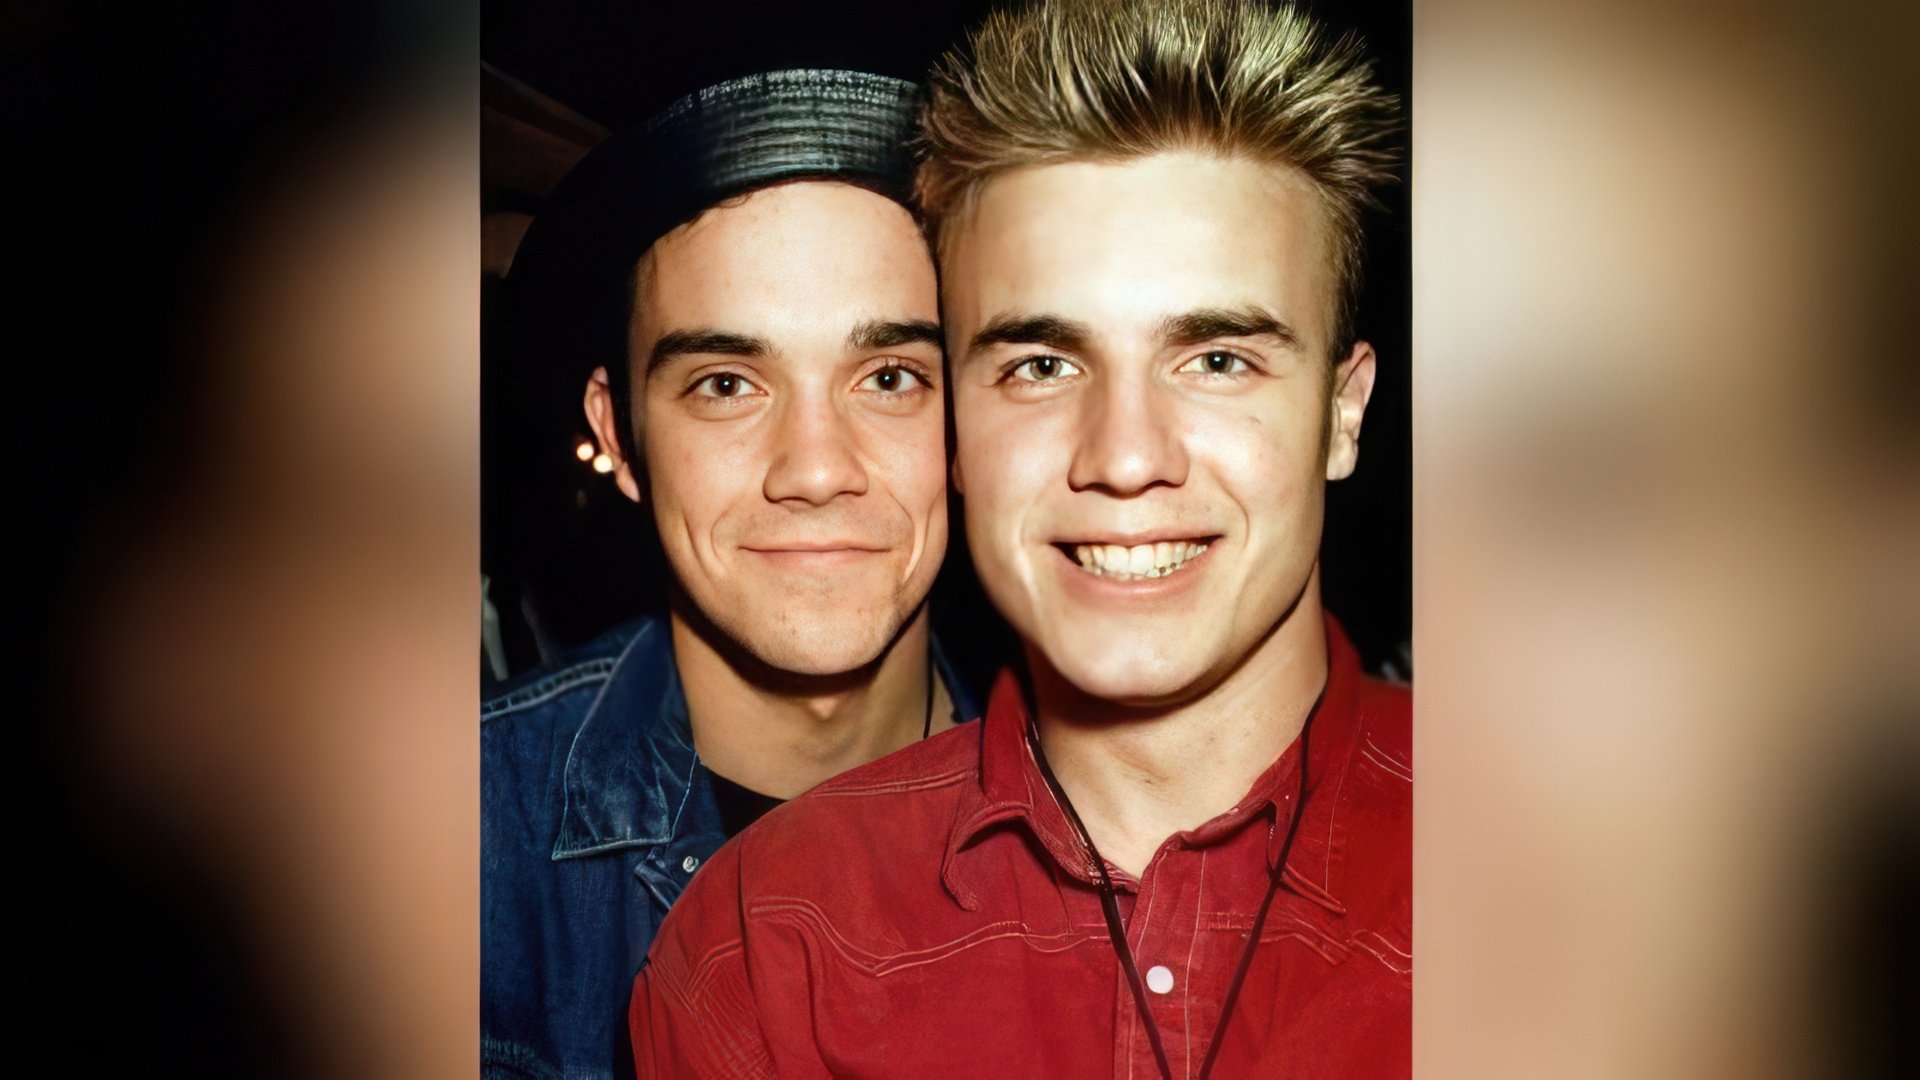 Robbie Williams and Gary Barlow were rivals